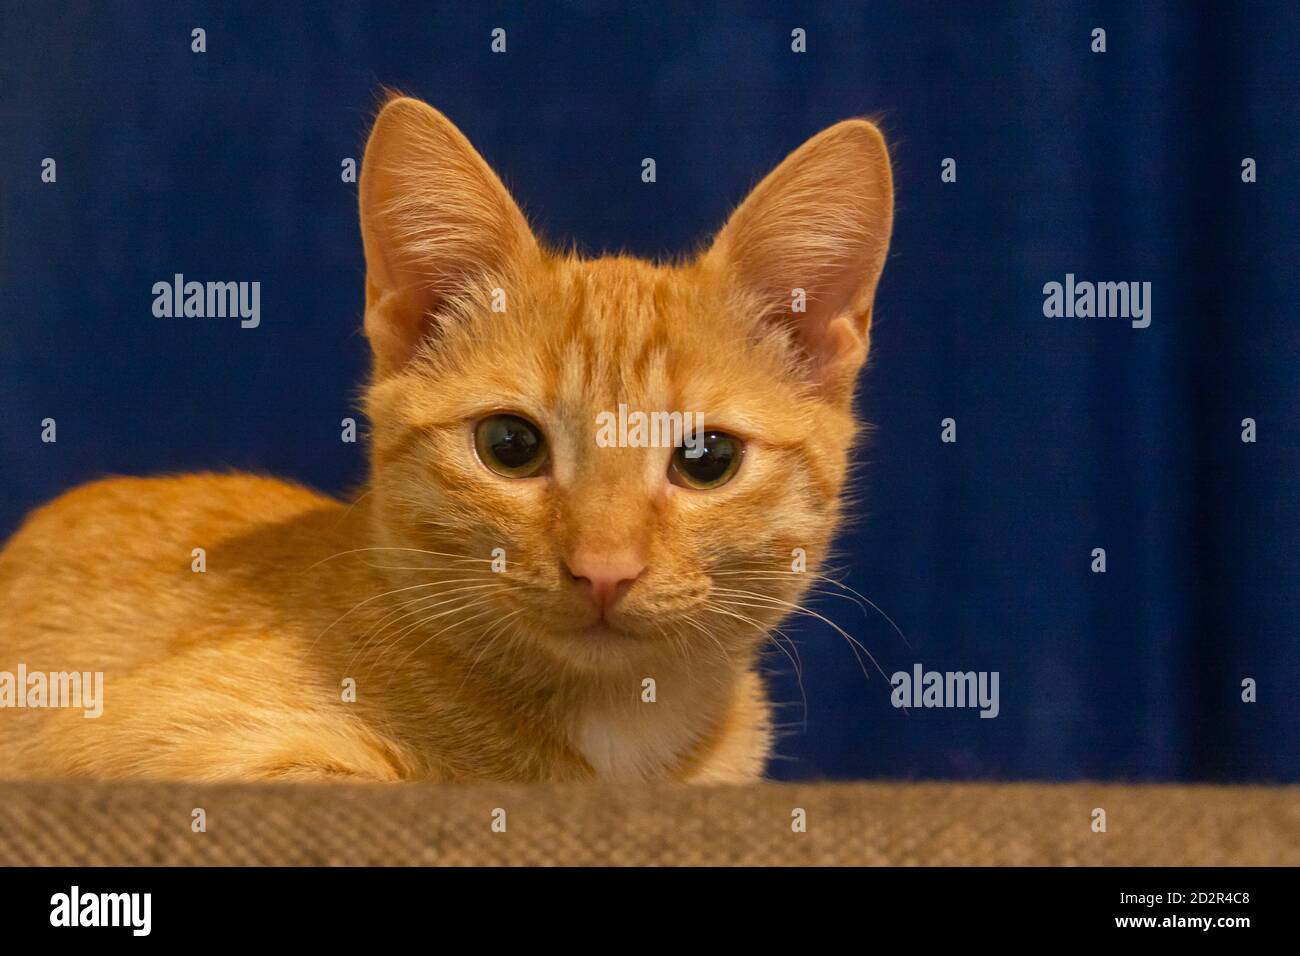 Portrait of a ginger cat close-up. Red kitten looks into the camera on a dark blue background. Selective focus. The concept of pets, love for animals. Stock Photo